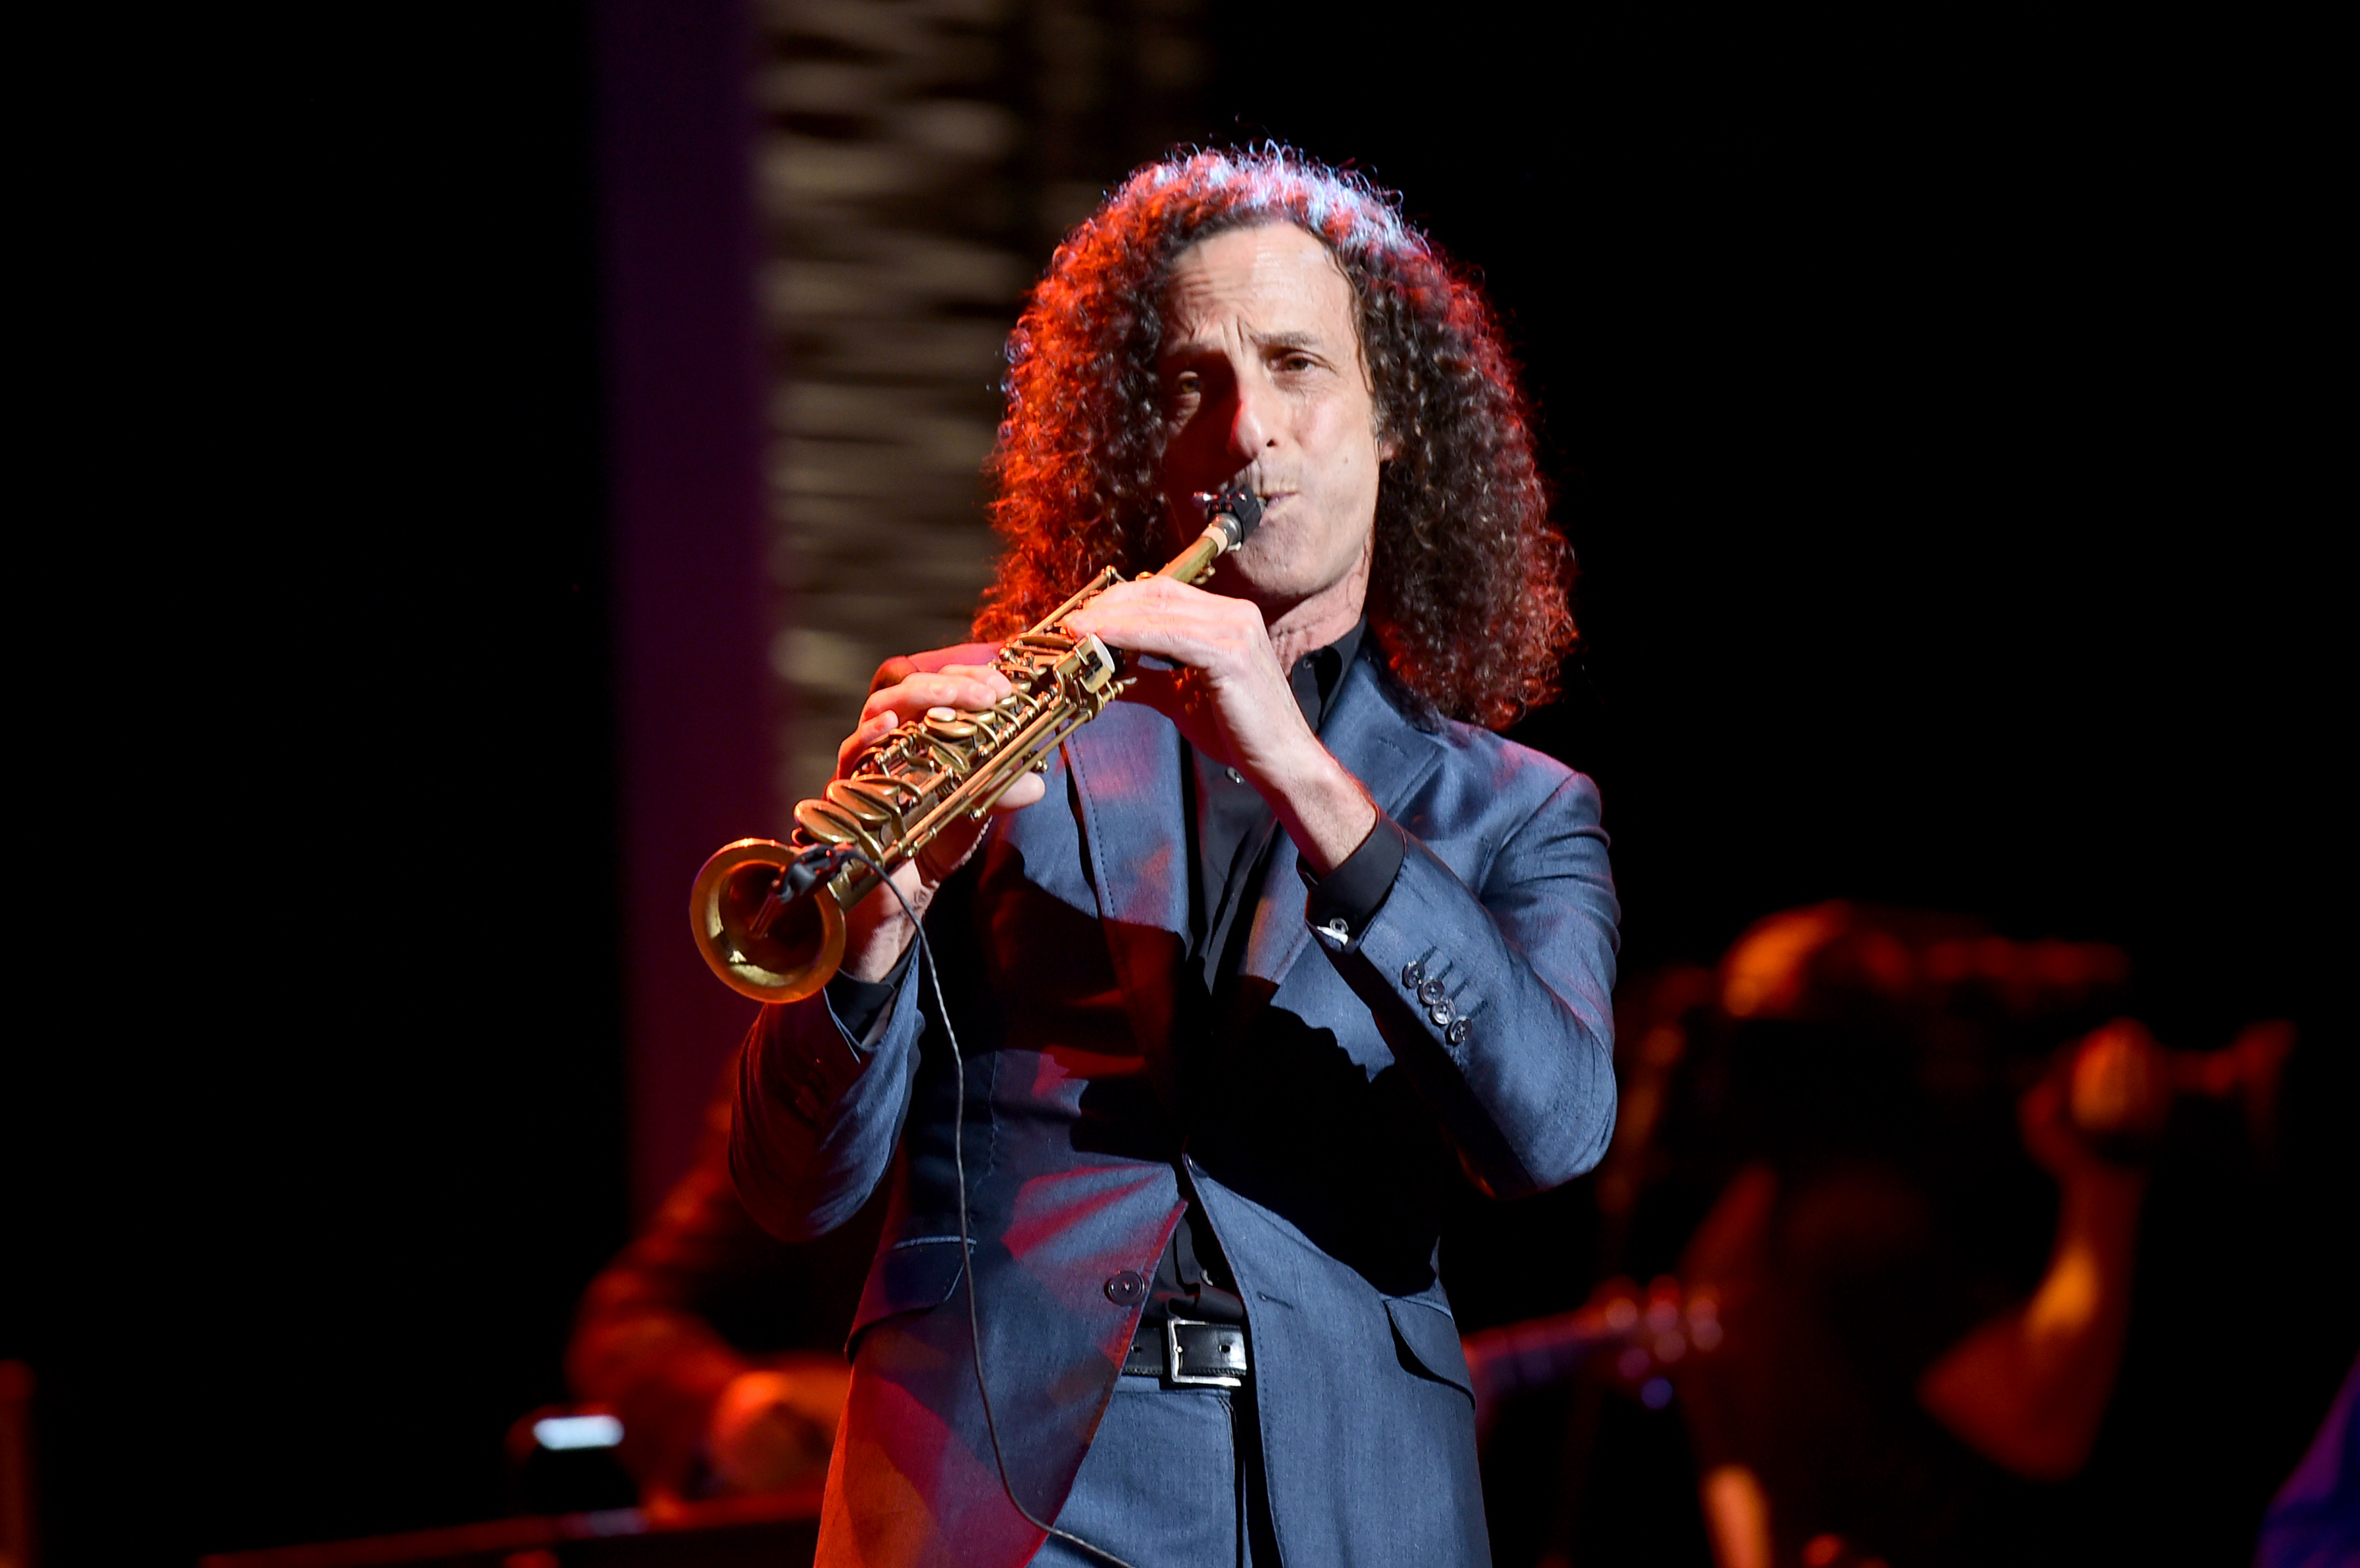 When Exactly Did Kenny G Turn Himself Into a Meme?